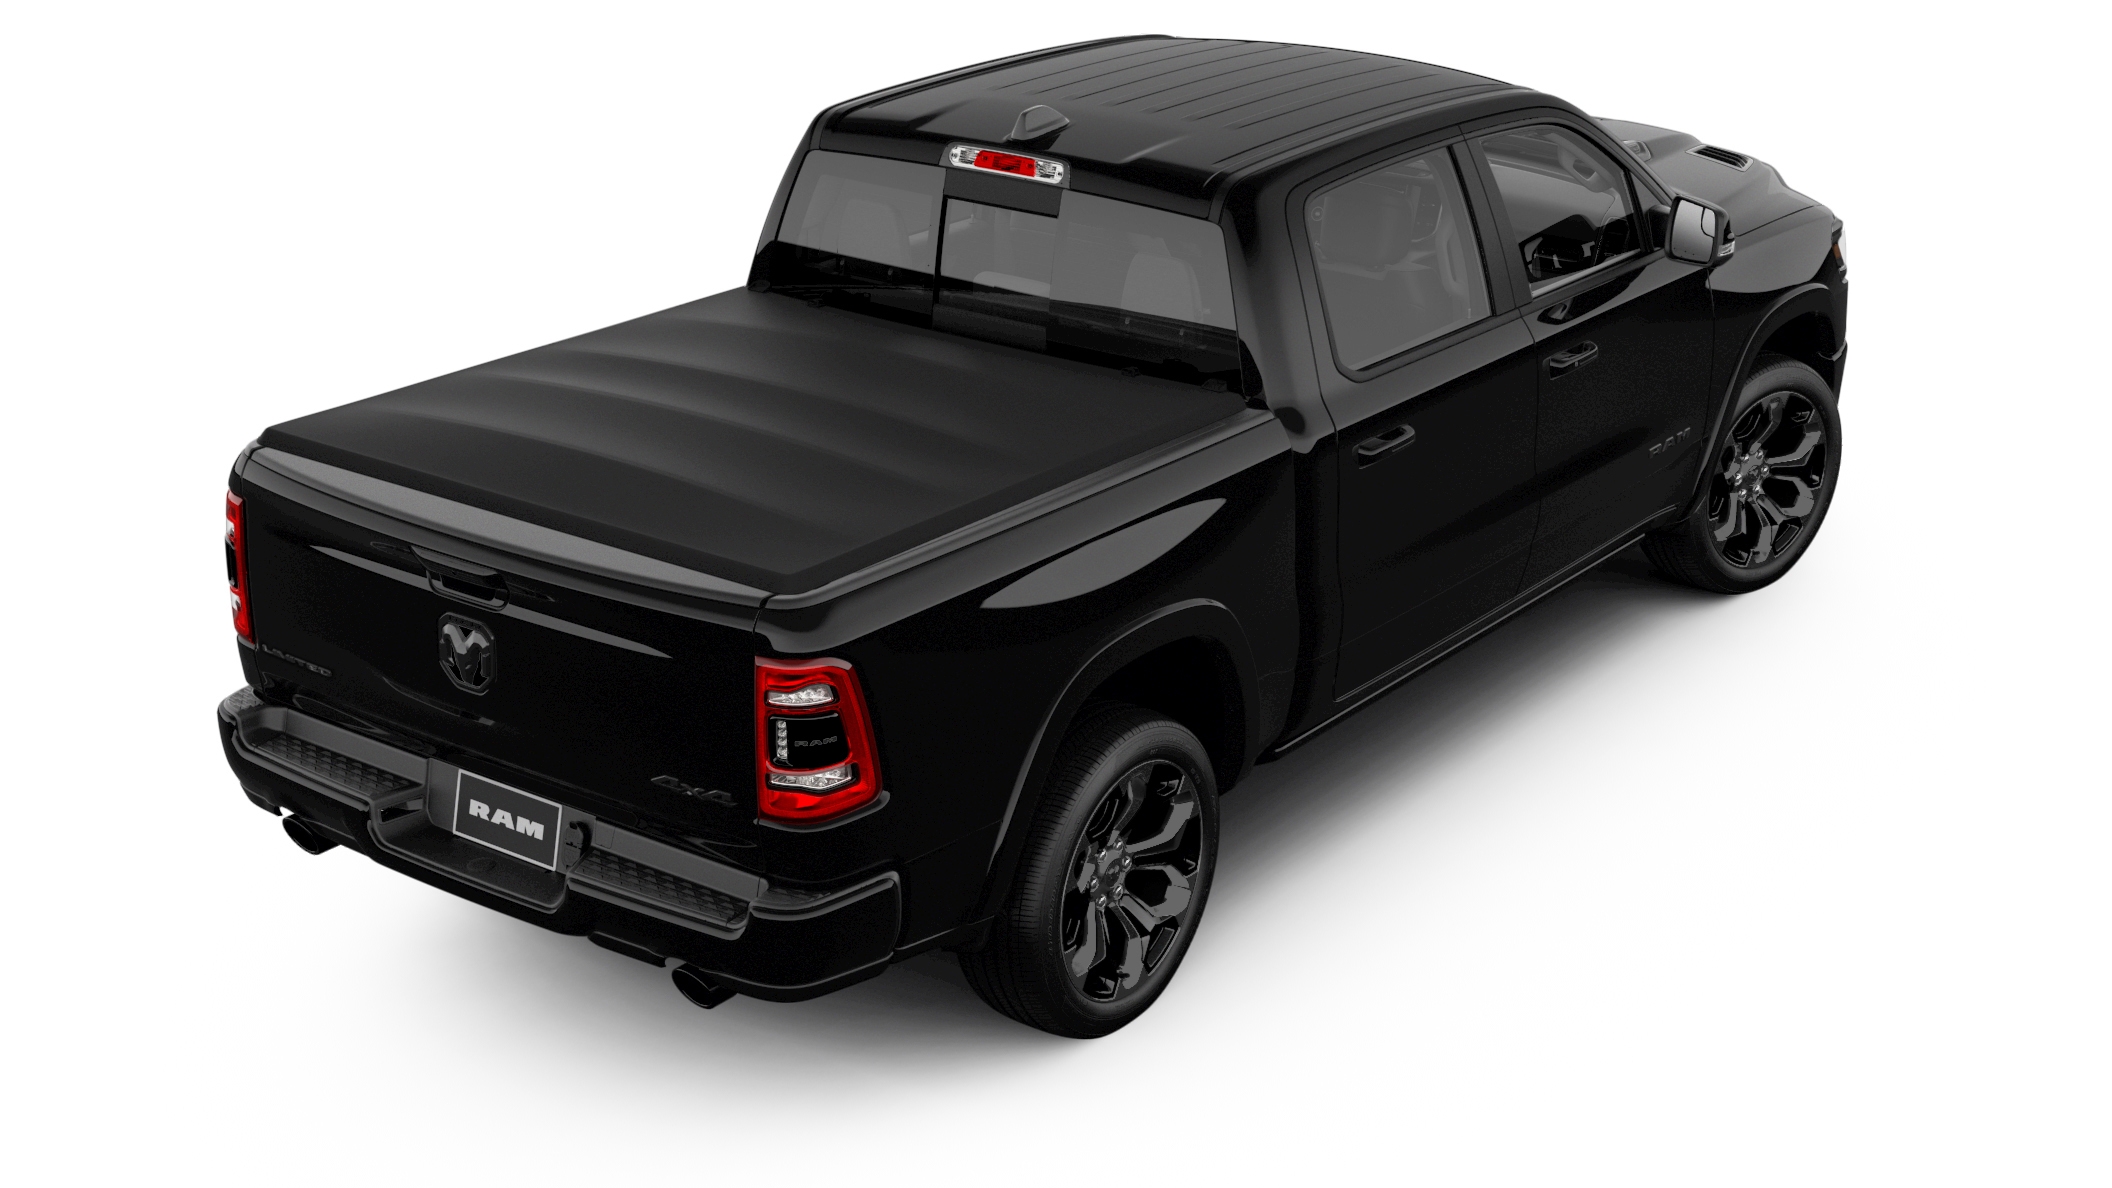 The Ram 1500 Goes Dark Murdered-Out - Maxim